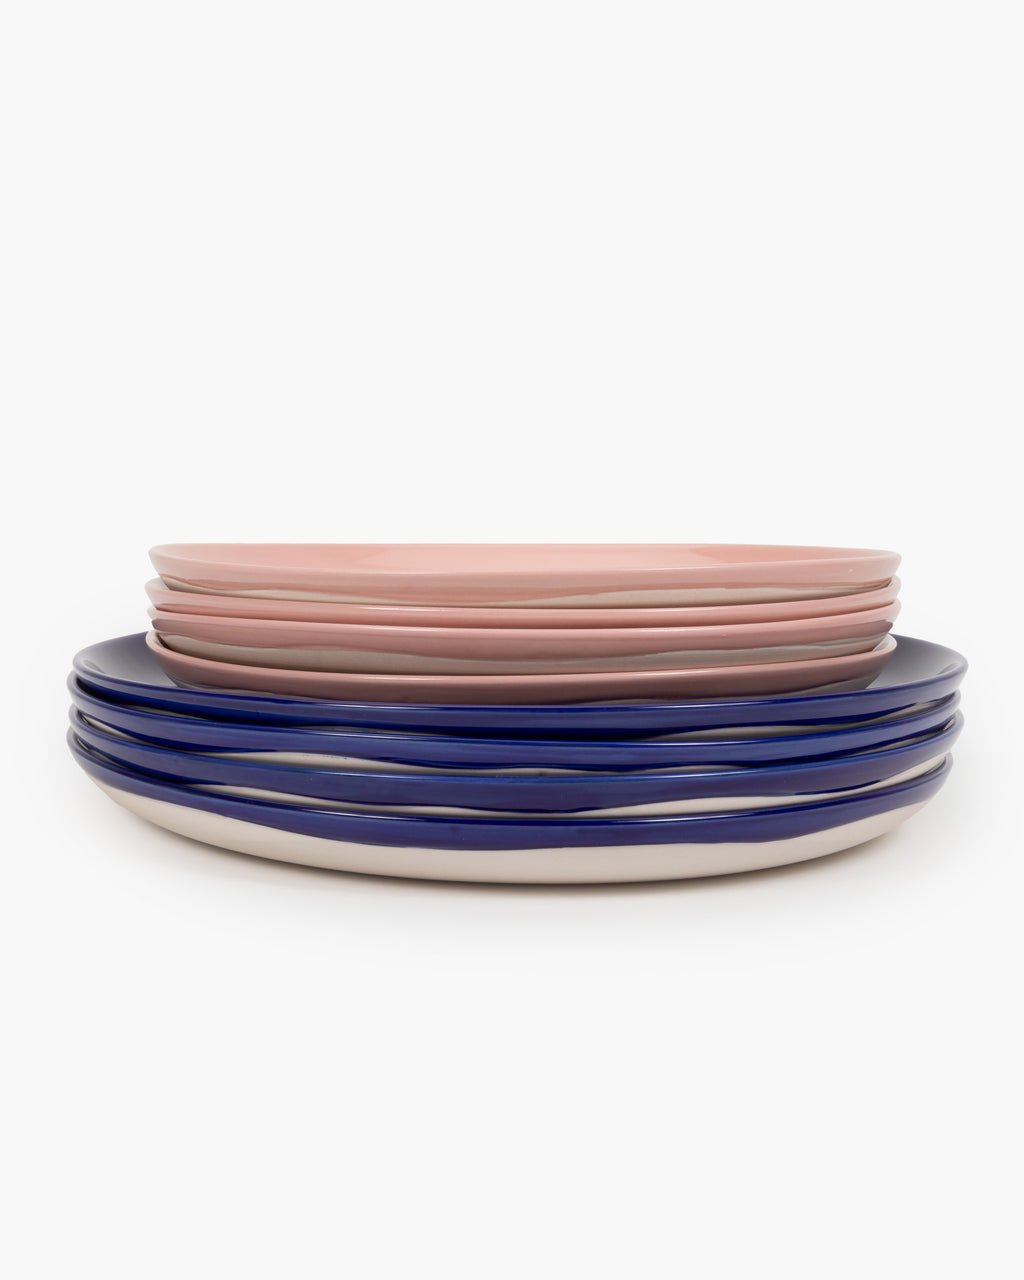 Dinner Set 12 pieces - Feast tableware by Ottolenghi - pink